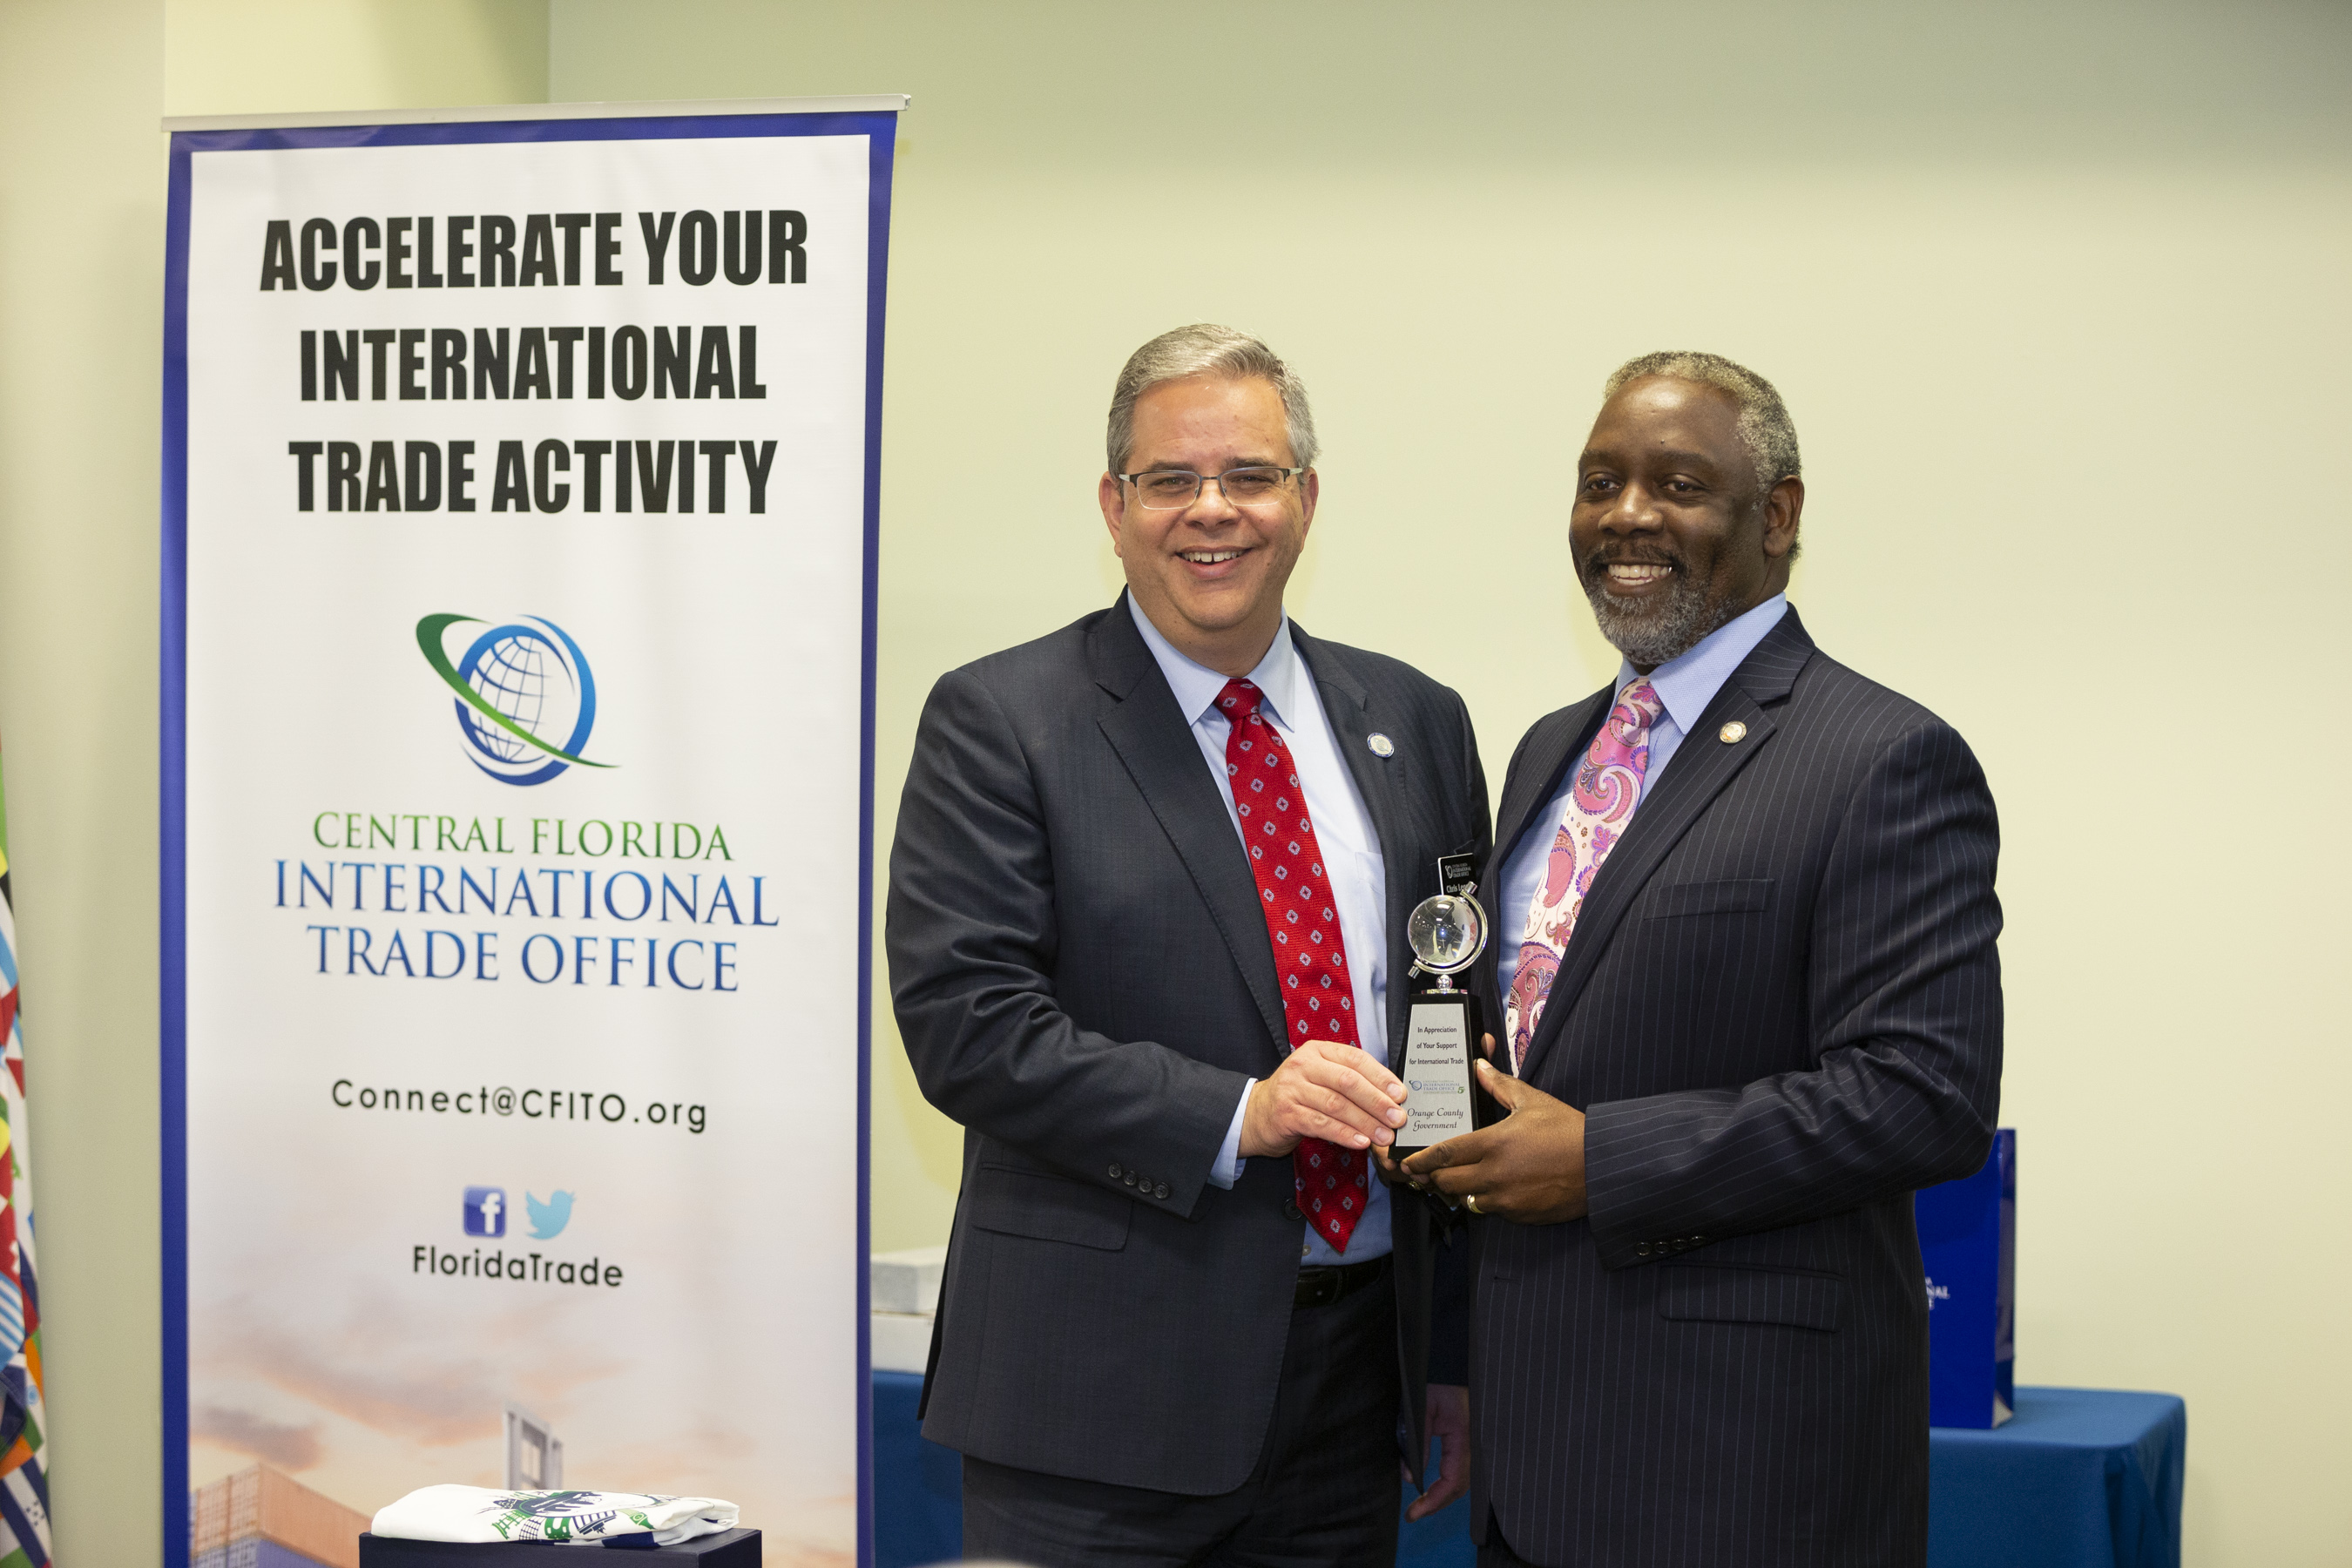 Central Florida International Trade Office Program Manager Christopher Leggett stands with Orange County Mayor Jerry L. Demings as they both hold an award.